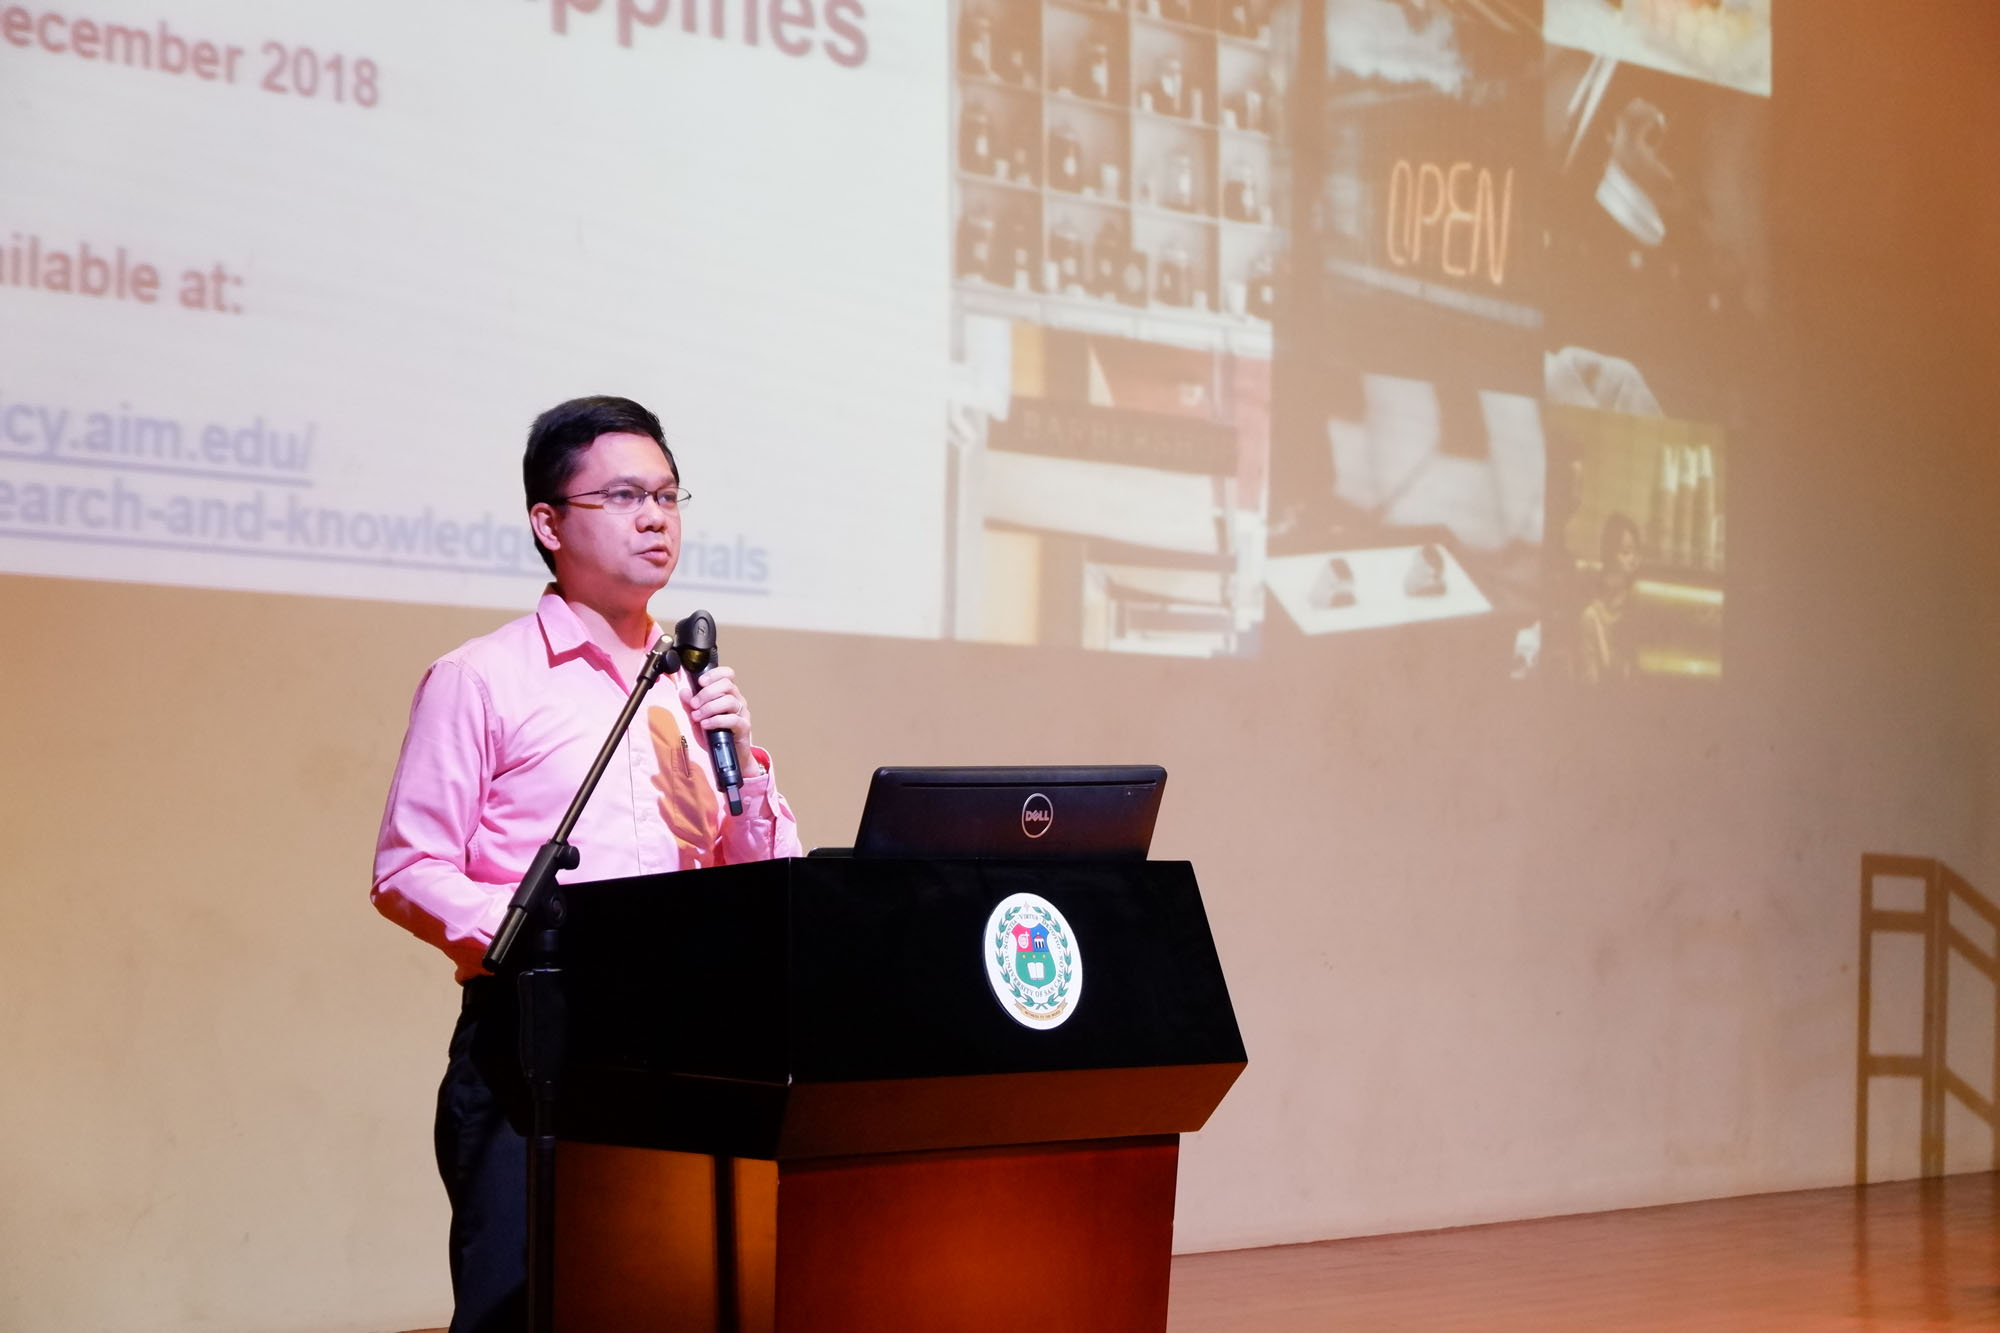 PASCN Regional Symposium on Disruptive Technologies: Opportunities, Challenges, and Risks-pascn-usc-20-20190123.jpg